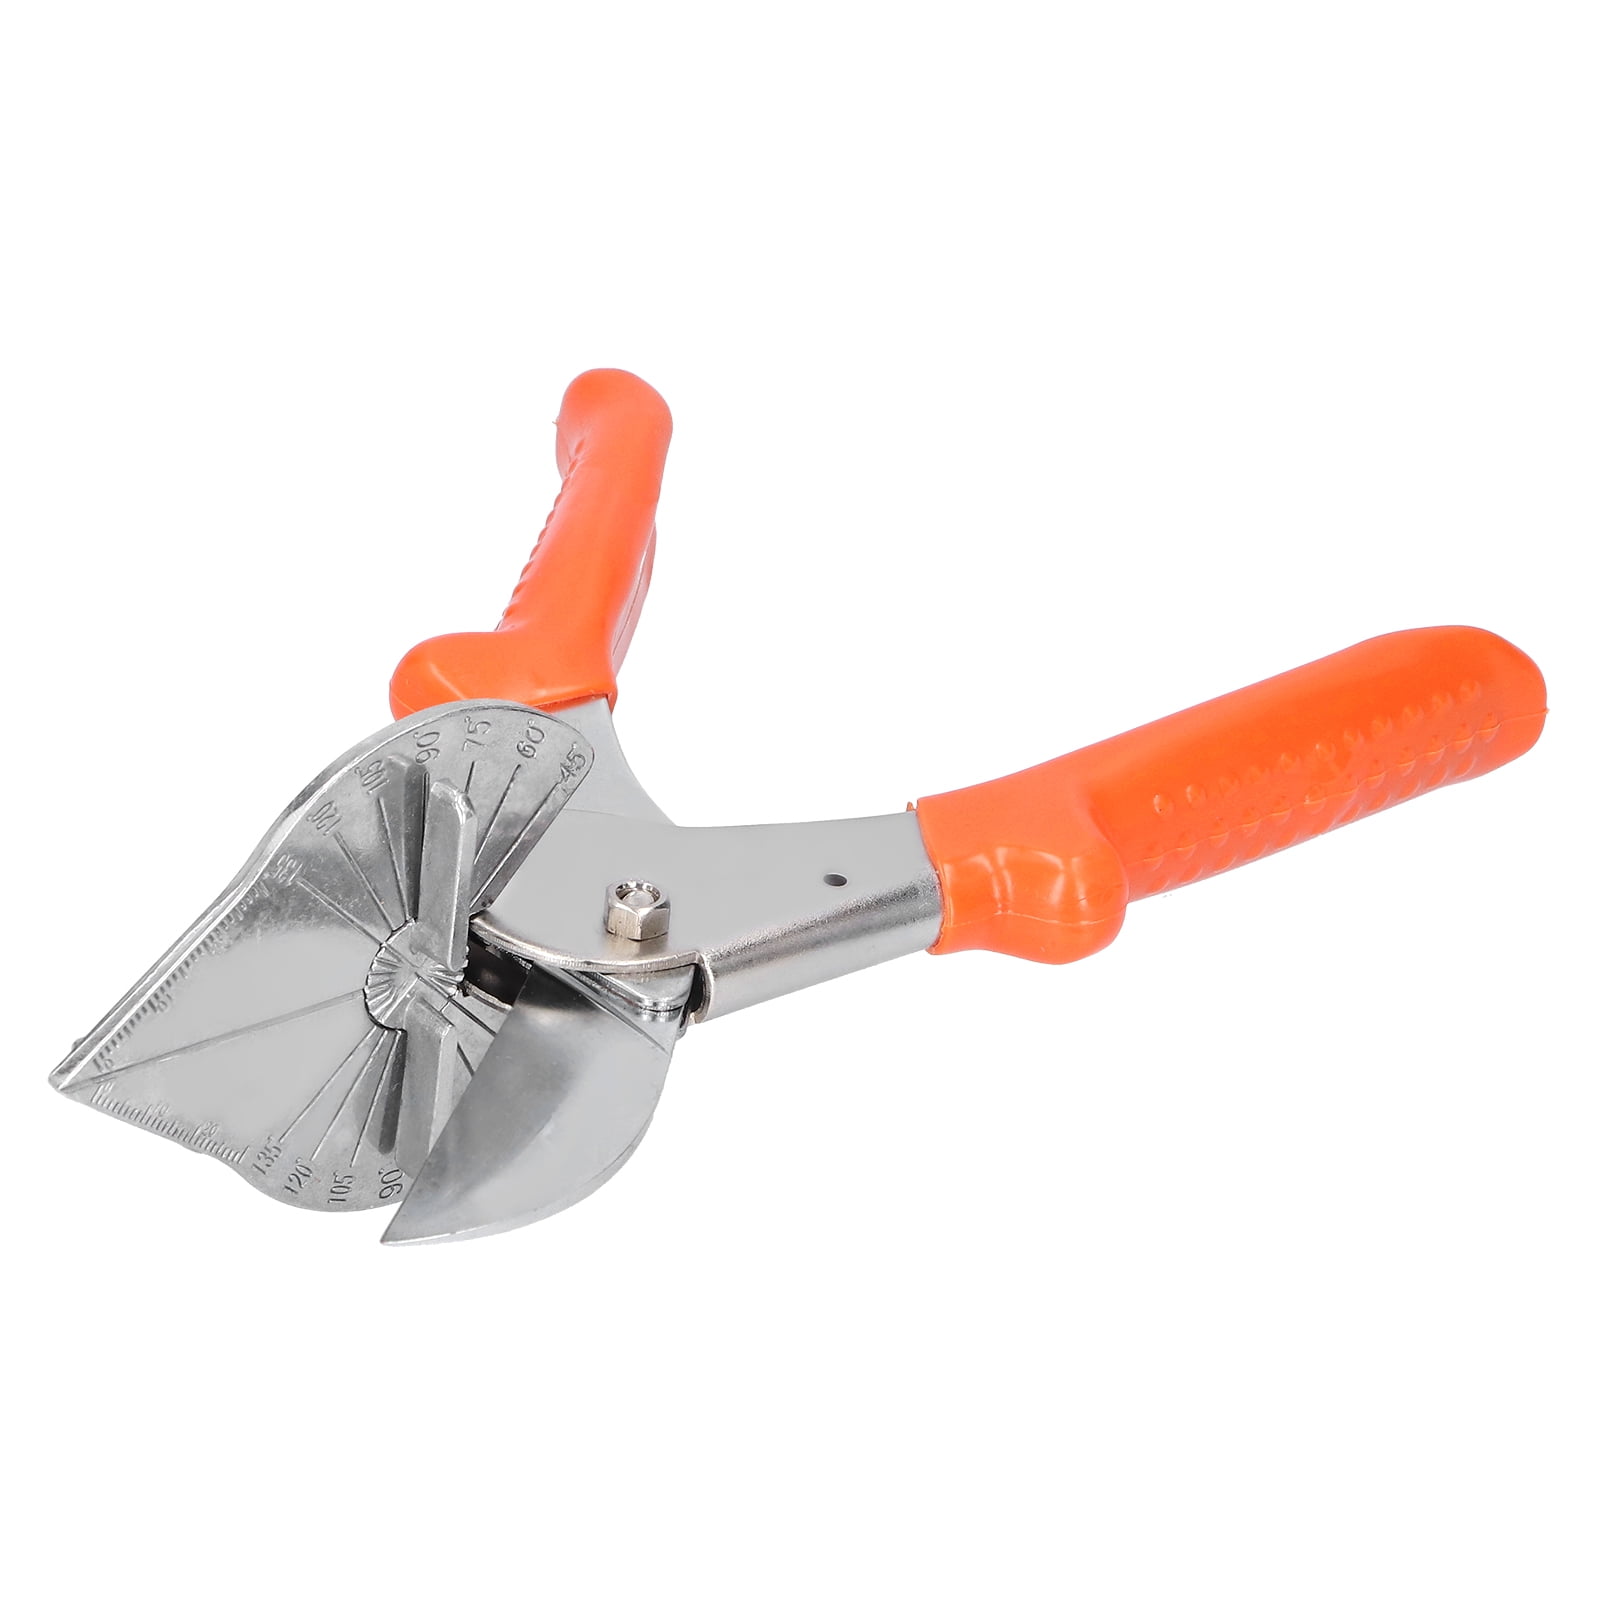 TRRAPLE Angle Miter Shear Cutter, Soft Wood Cutter 45 to 135 Degree Multi  Angle Trim Cutter Gasket Shear for Cutting Soft Wood Plastic PVC